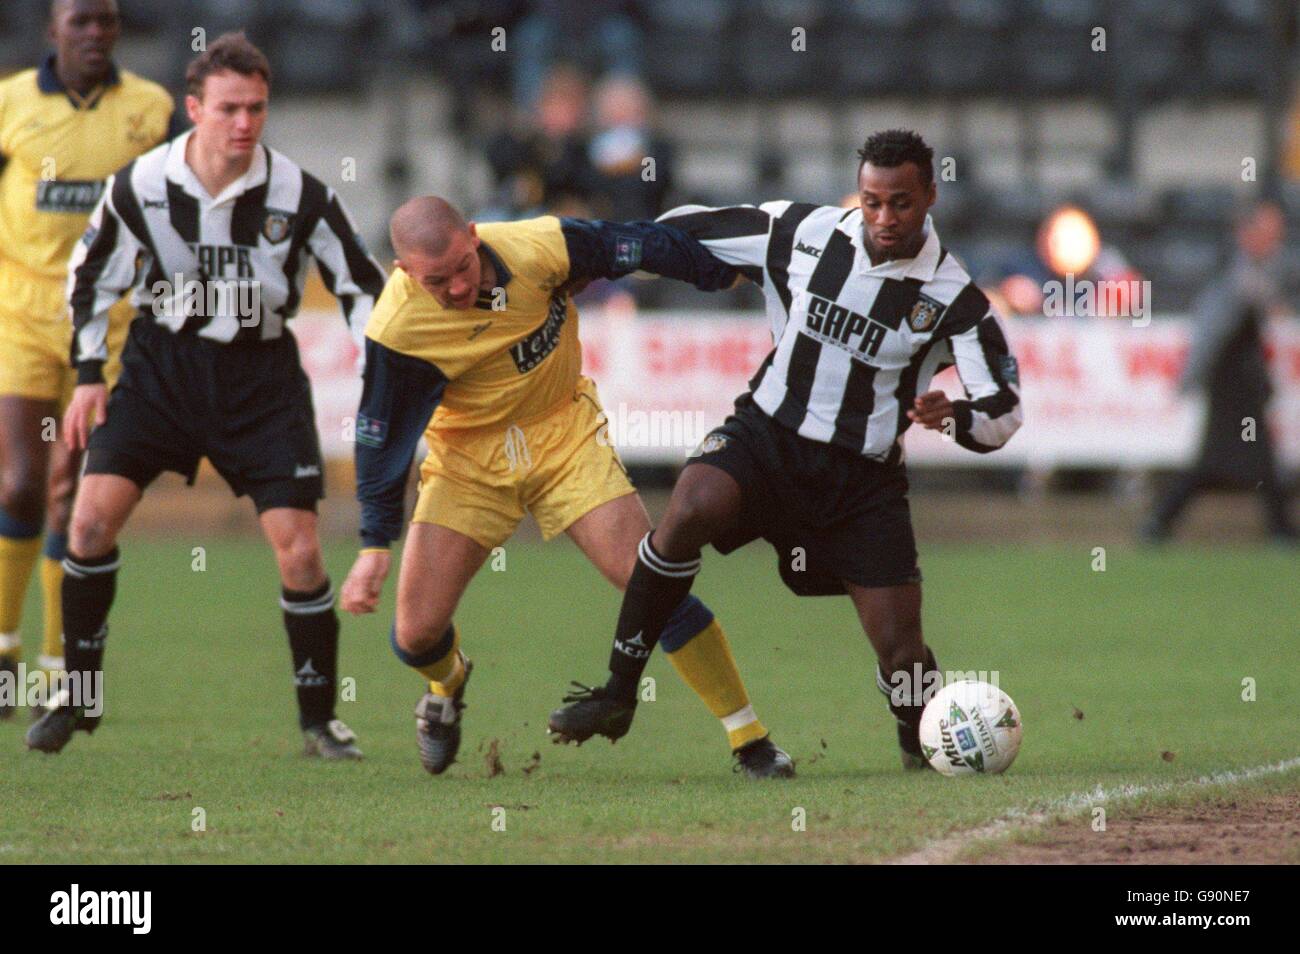 Soccer - Nationwide League Division Three - Notts County v Shrewsbury Town. Notts County's Dennis Pearce holds off the challenge from Shrewsbury Town's Lee Steele Stock Photo